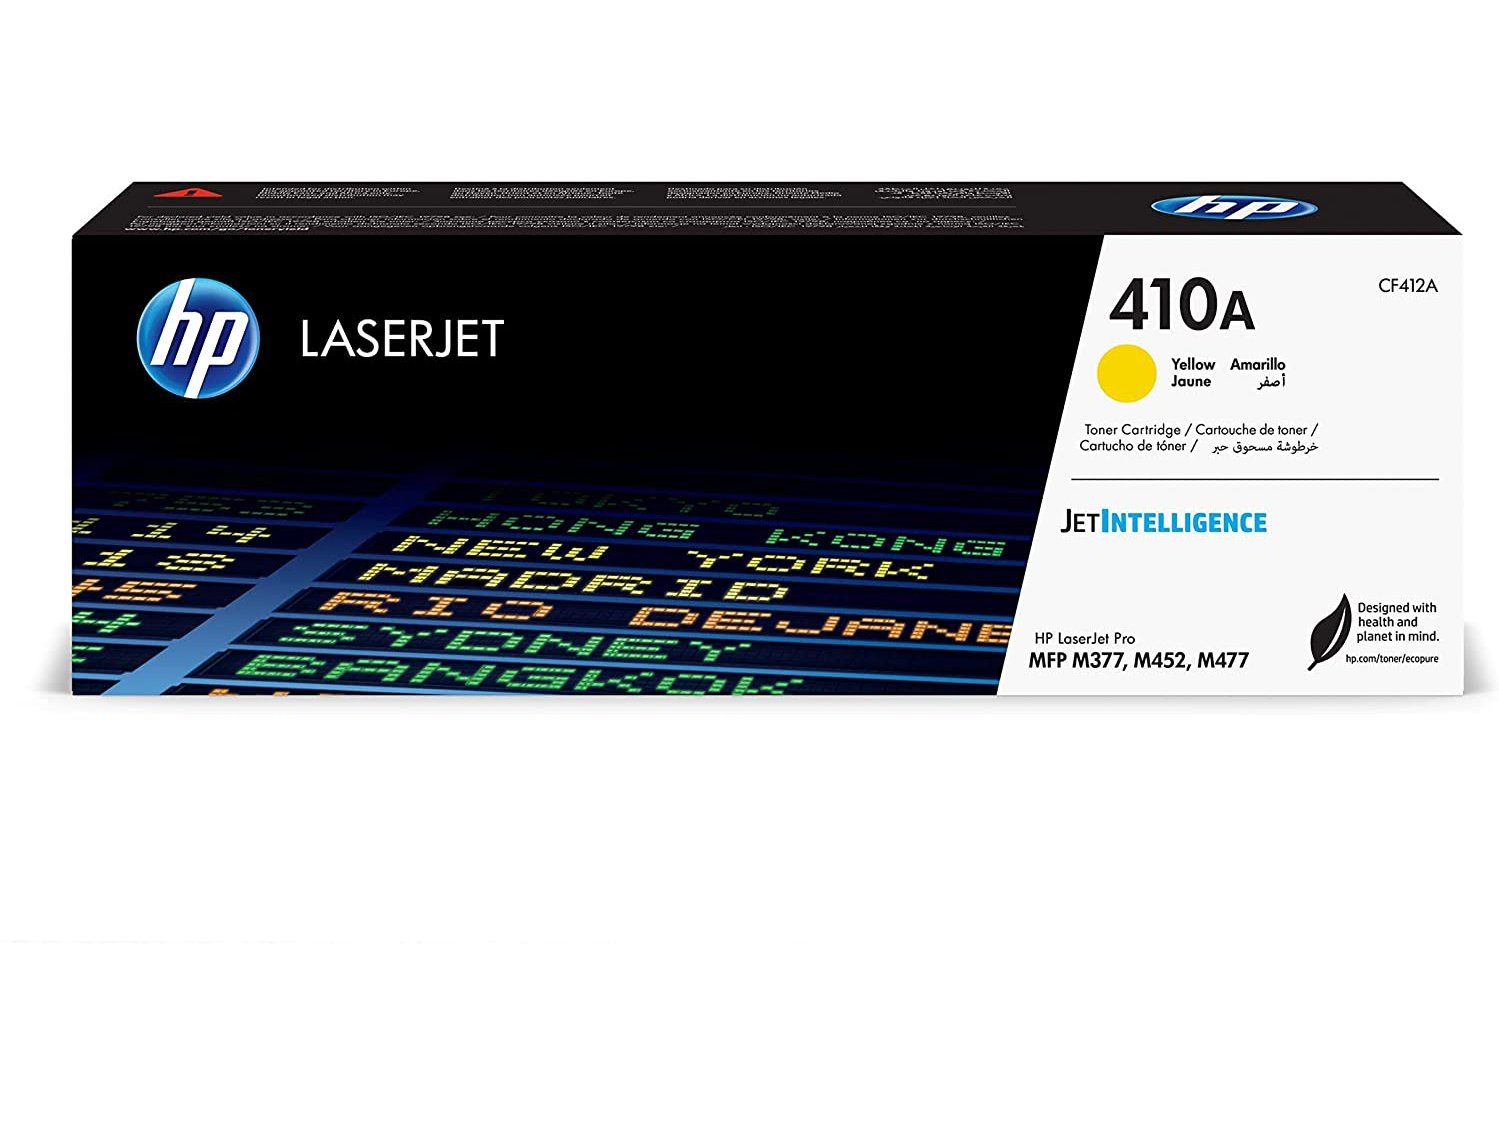 ICU Compatible/ OEM Get HP ICUCF412A Yields 5000 Pages Compatible 410A CF412A Toner Cartridge, Yellow 5K Yield